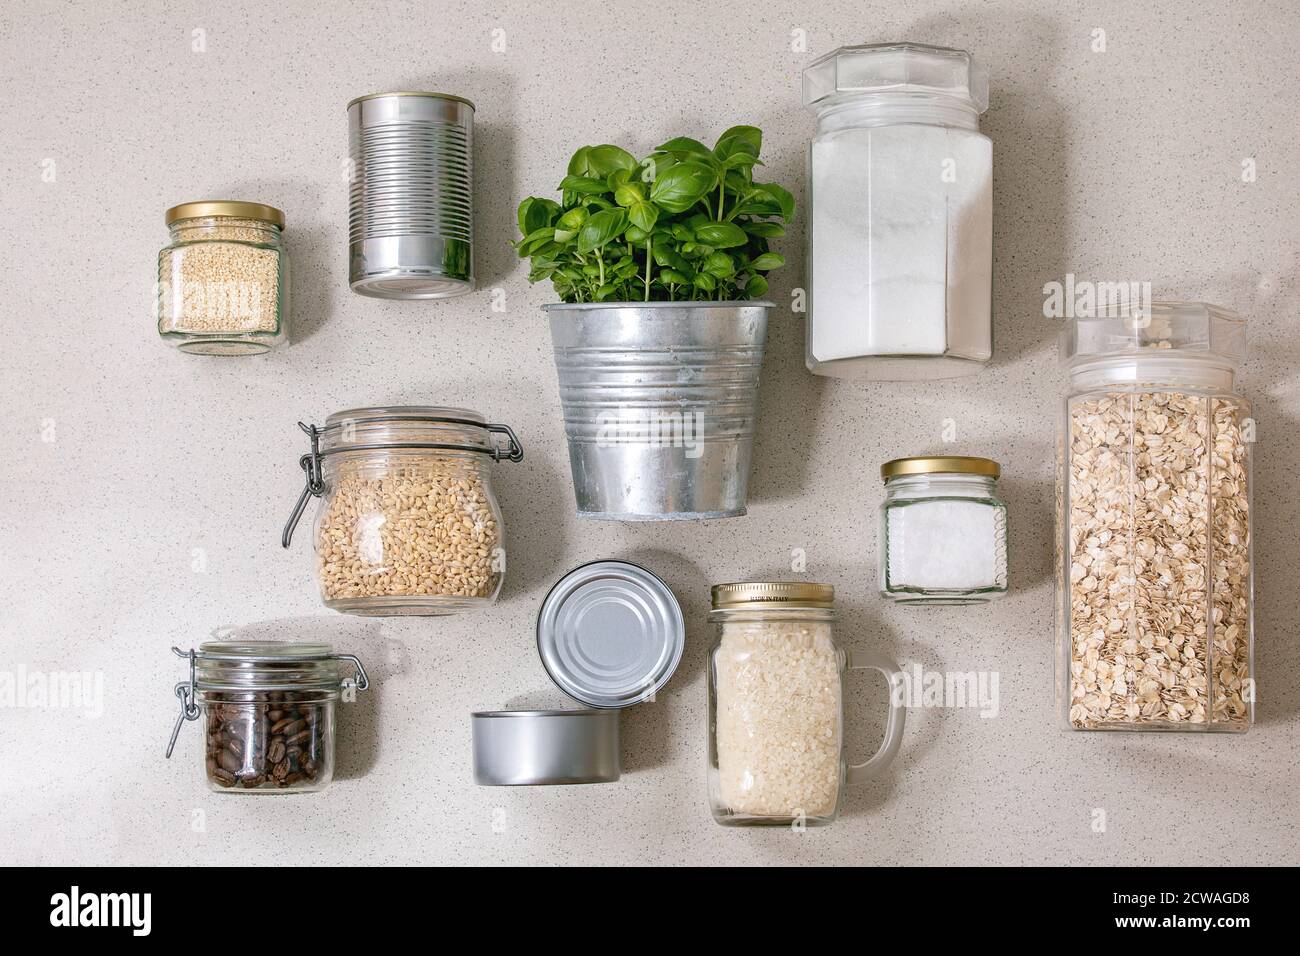 Flat lay of food supplies crisis for quarantine isolation period. Different glass jars with grains, cans of canned food, pot of basil Stock Photo